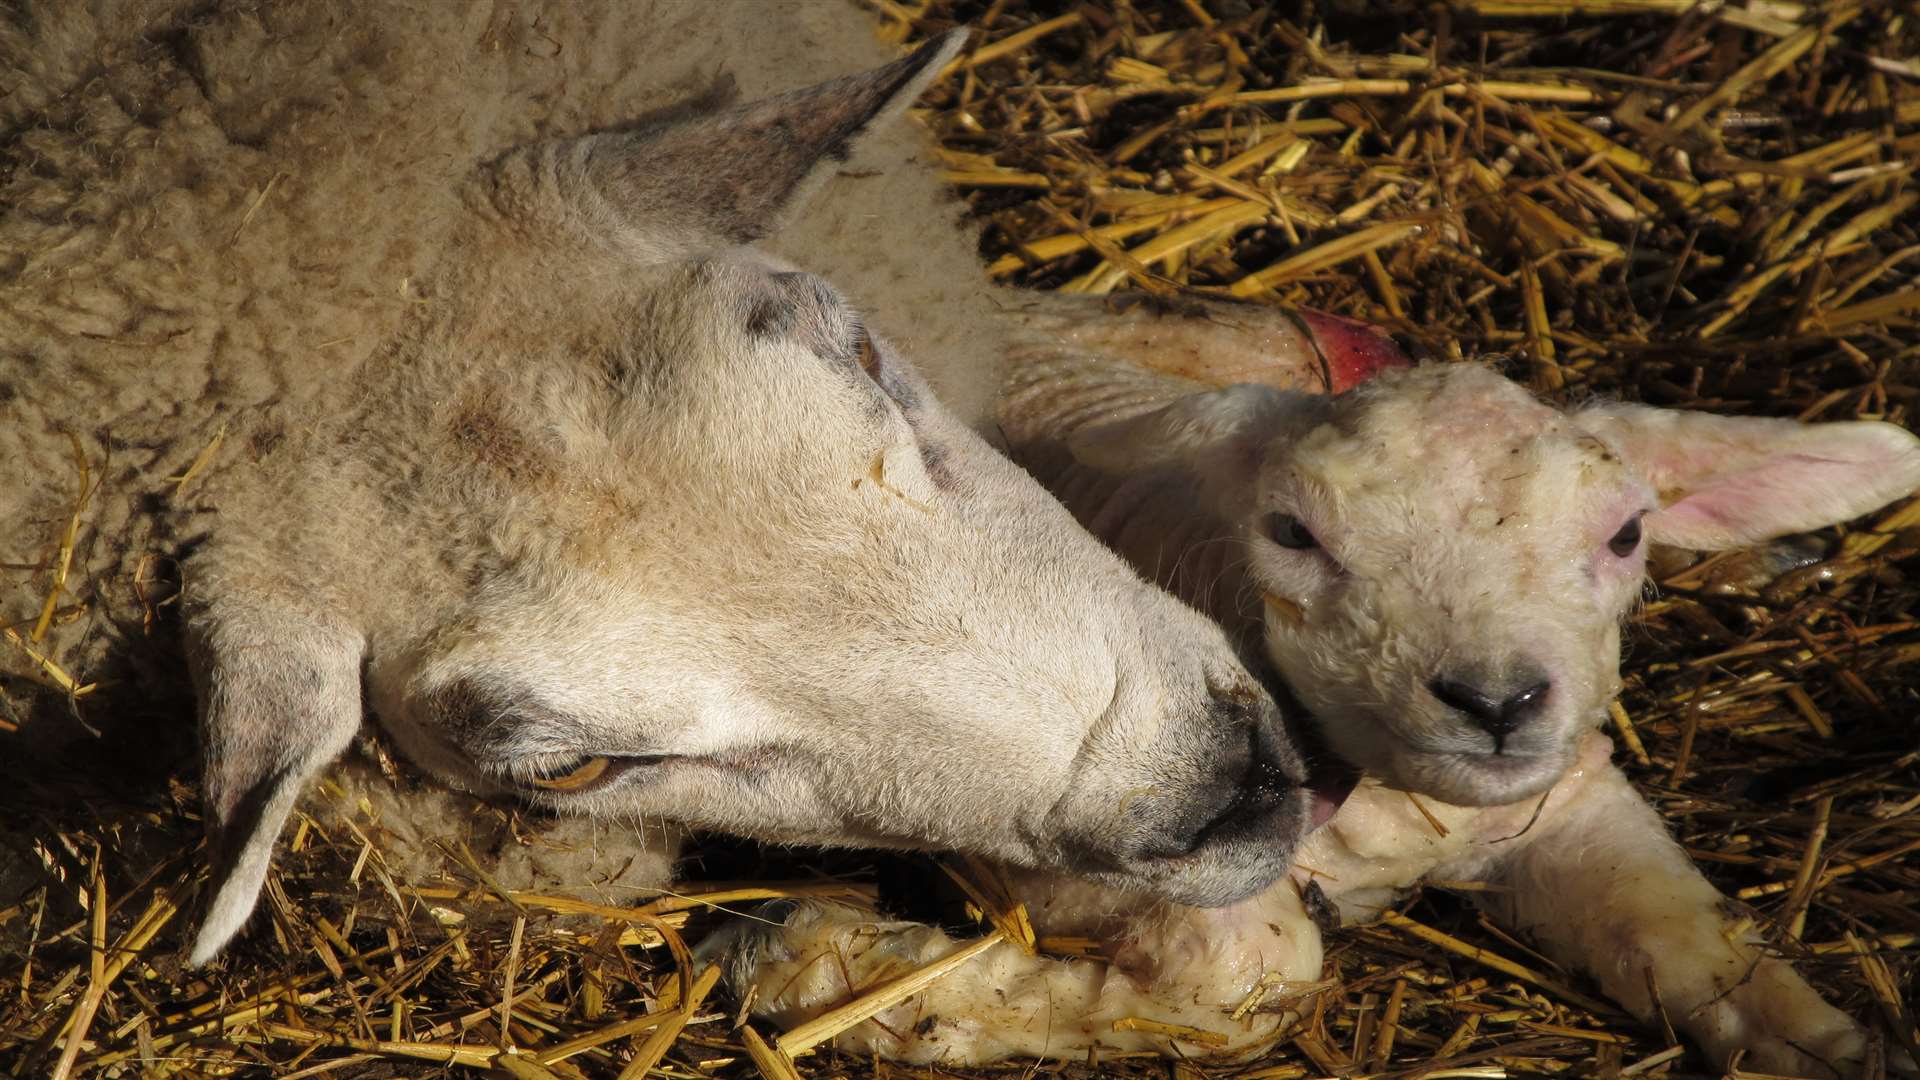 See newborn lambs over Easter at Brockhill Park lambing weekend